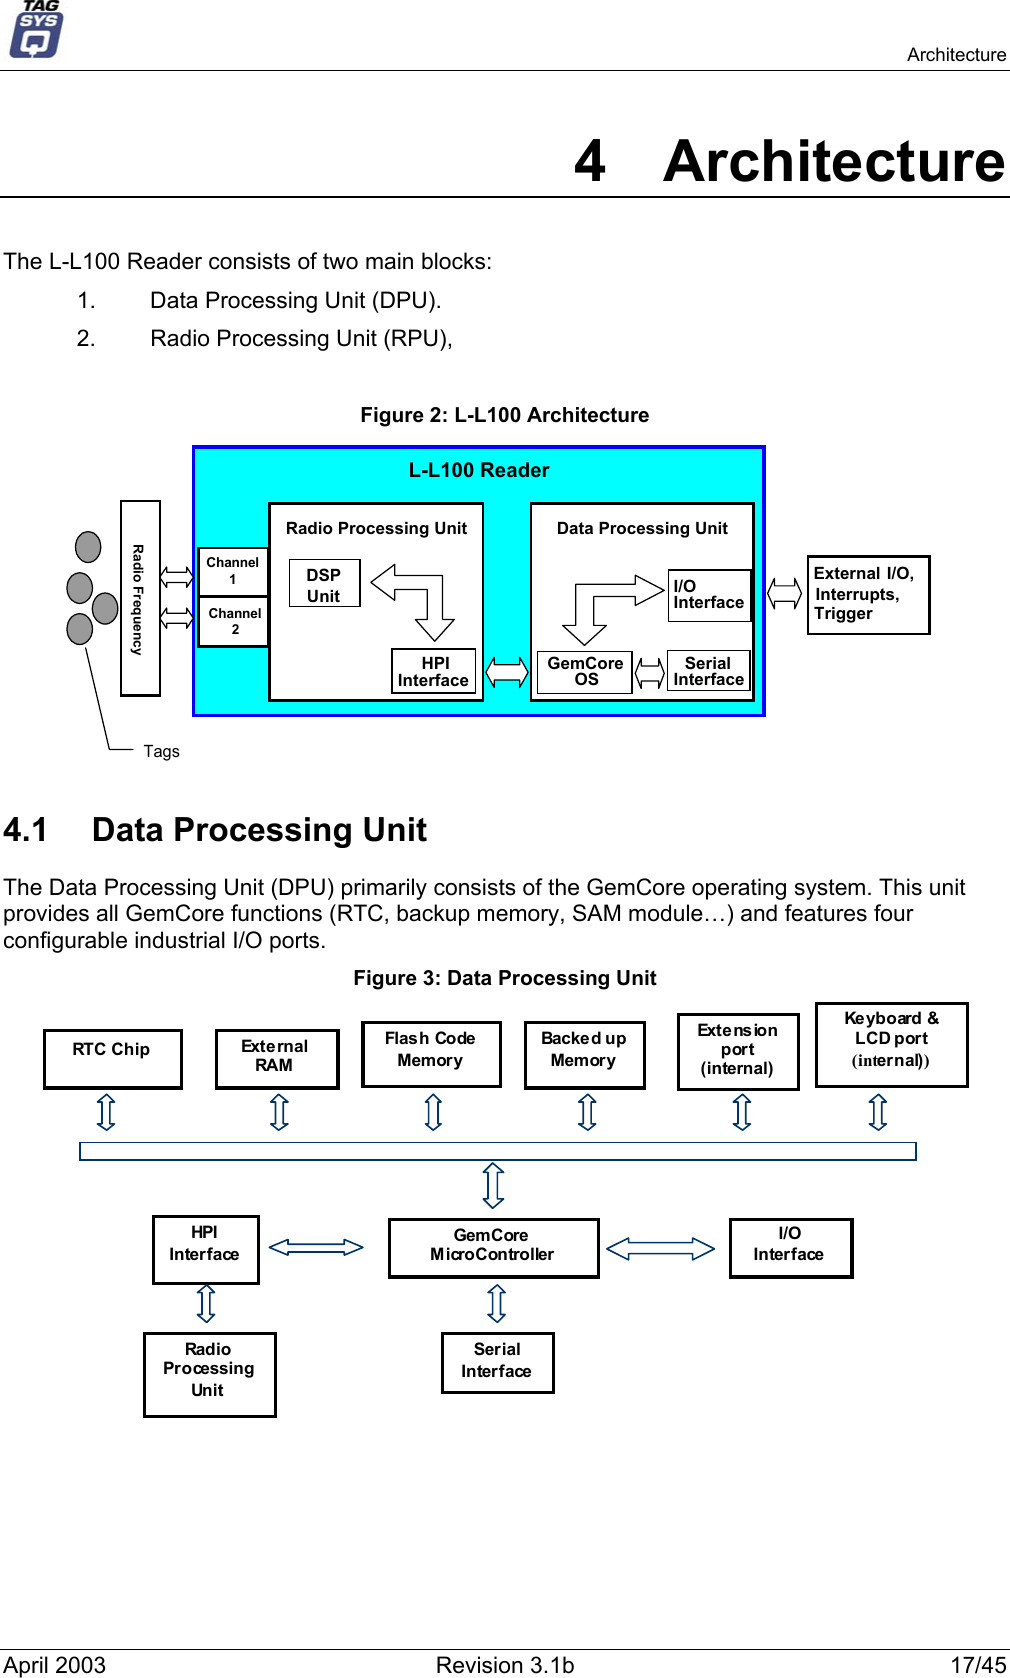   Architecture 4 Architecture The L-L100 Reader consists of two main blocks:  1.  Data Processing Unit (DPU). 2.  Radio Processing Unit (RPU),  Figure 2: L-L100 Architecture Data Processing UnitSerialInterfaceHPIInterfaceDSPUnitChannel1Channel2GemCoreOSRadio Processing UnitL-L100 ReaderRadio FrequencyI/OInterfaceExternal I/O,Interrupts,TriggerTags 4.1  Data Processing Unit The Data Processing Unit (DPU) primarily consists of the GemCore operating system. This unit provides all GemCore functions (RTC, backup memory, SAM module…) and features four configurable industrial I/O ports. Figure 3: Data Processing Unit GemCoreMicroControllerRTC ChipI/OInterfaceExt e ns io nport(internal)SerialInterfaceExt e rn a lRAMHPIInterfaceFlas h CodeMemoryBacked upMemoryRadioProcessingUnitKe yboard &amp;LCD port(internal))  April 2003  Revision 3.1b  17/45 